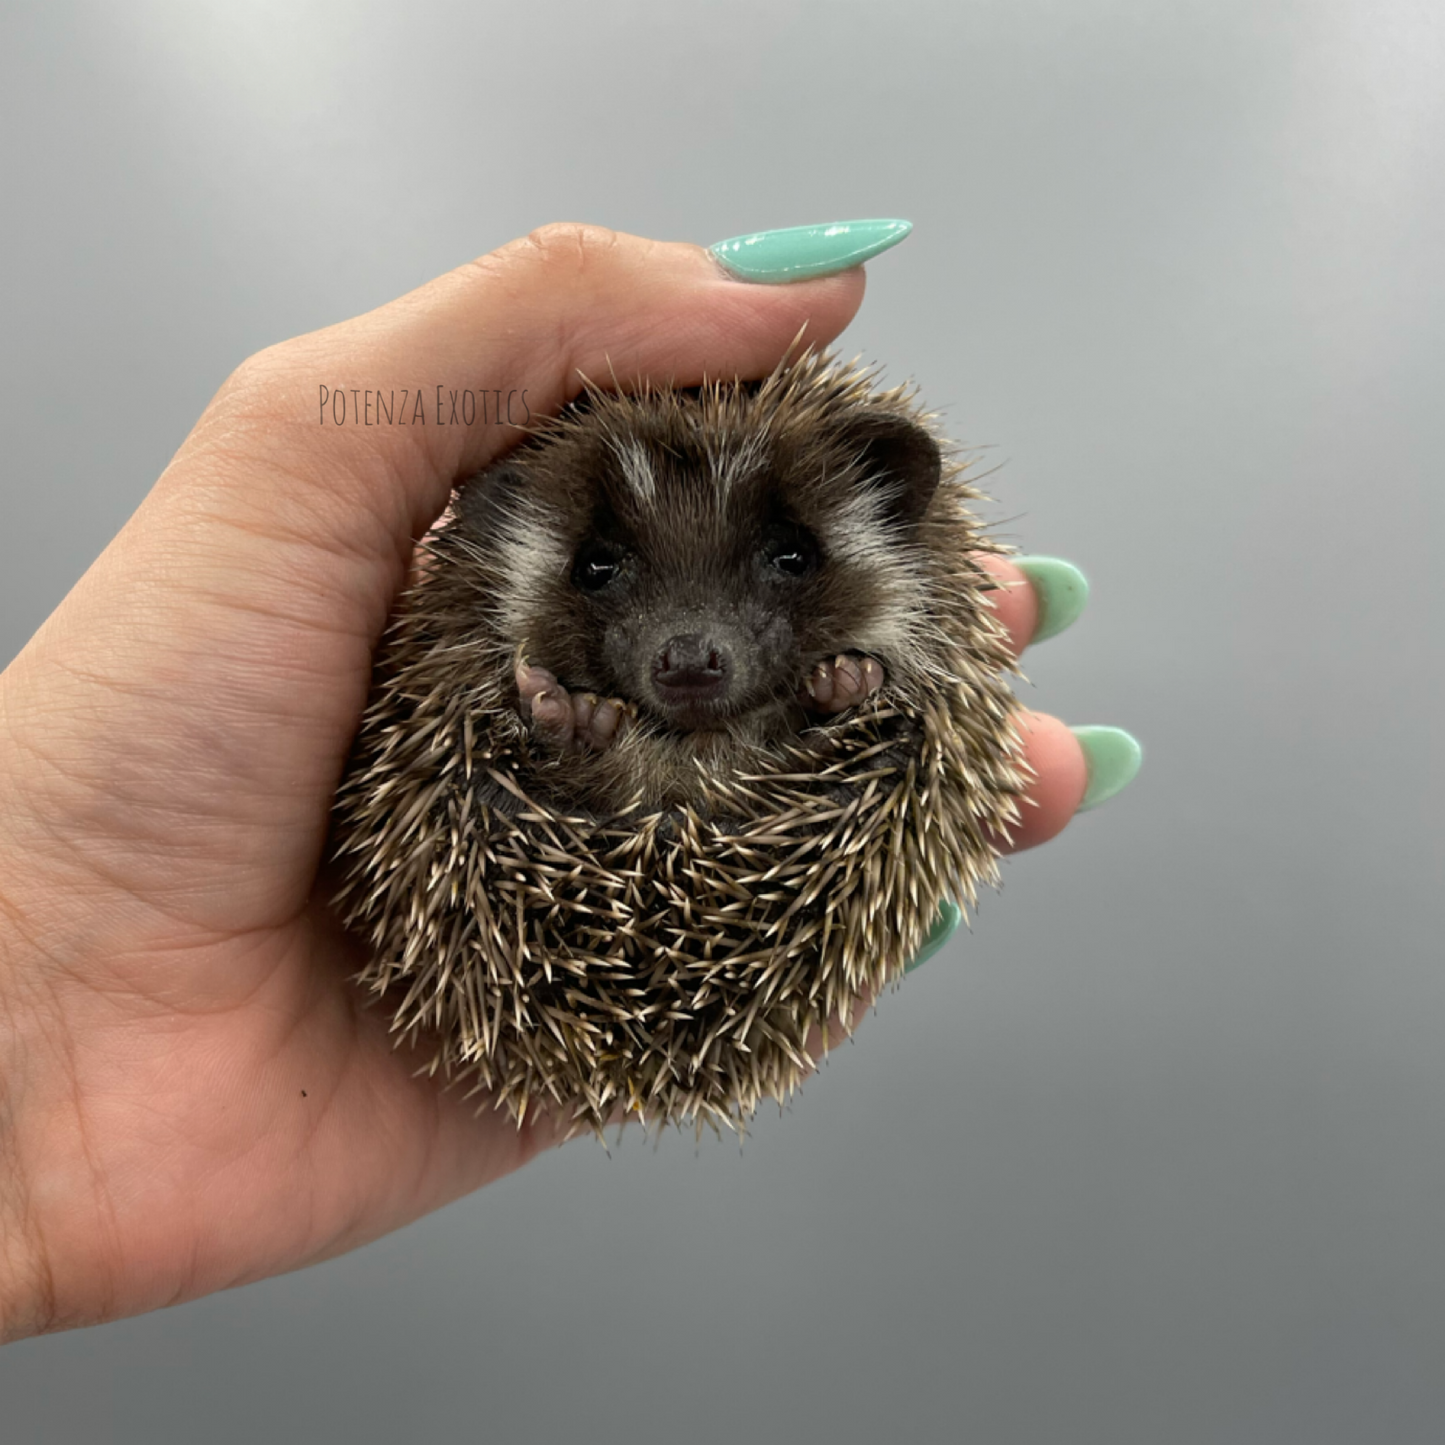 Pedigreed Hedgehogs for Sale DFW Texas